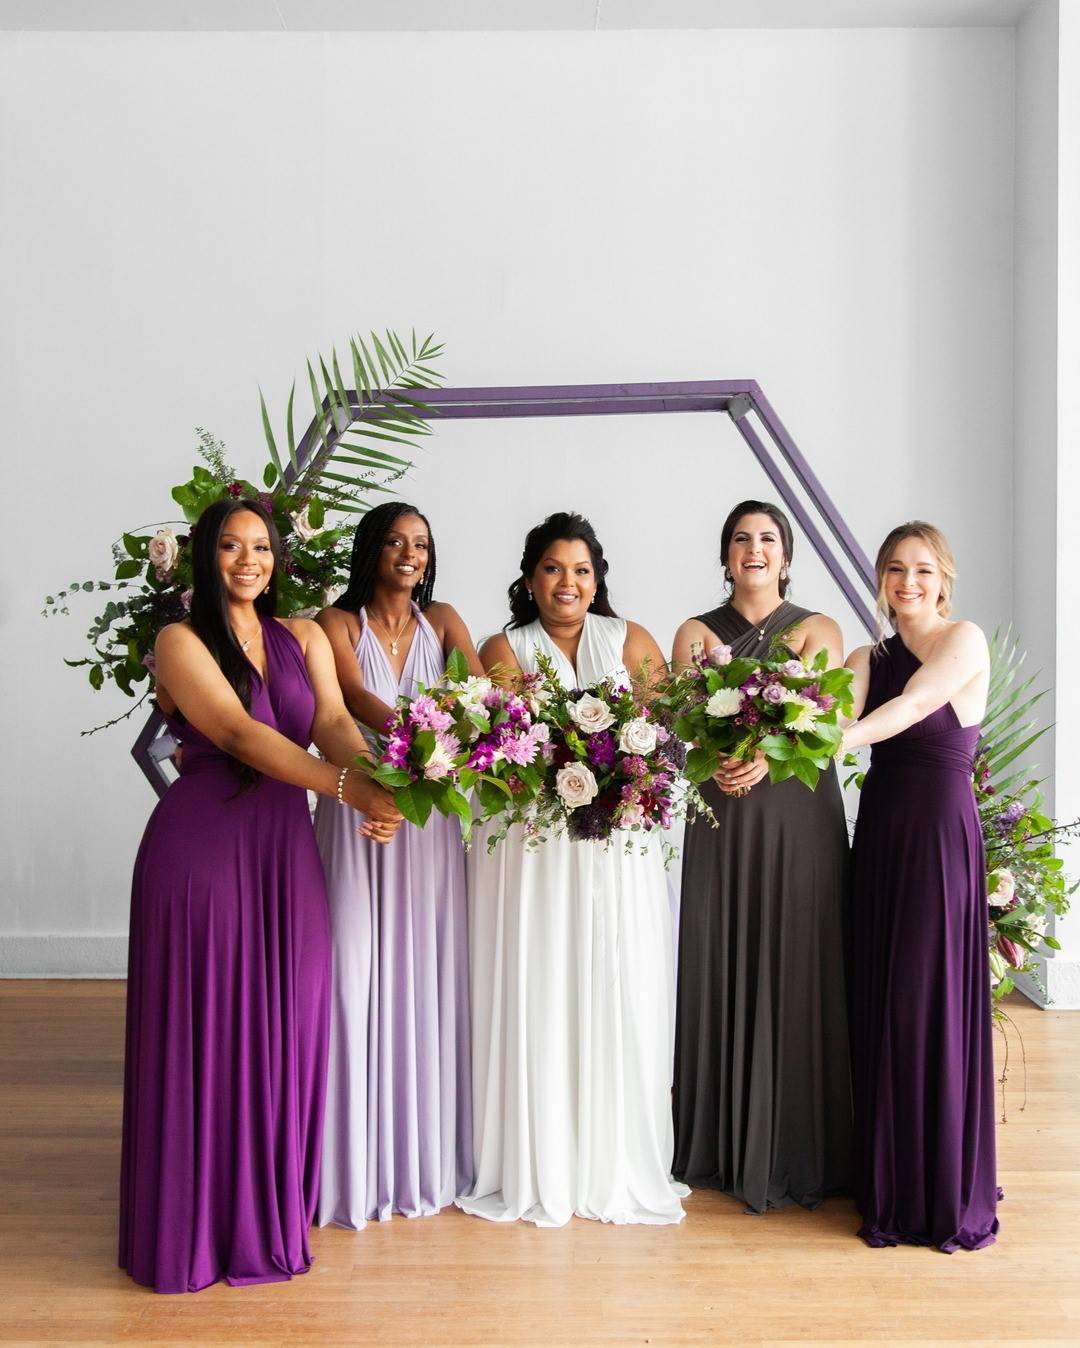 online contests, sweepstakes and giveaways - Henkaa's Outfit Your Bridal Party Contest